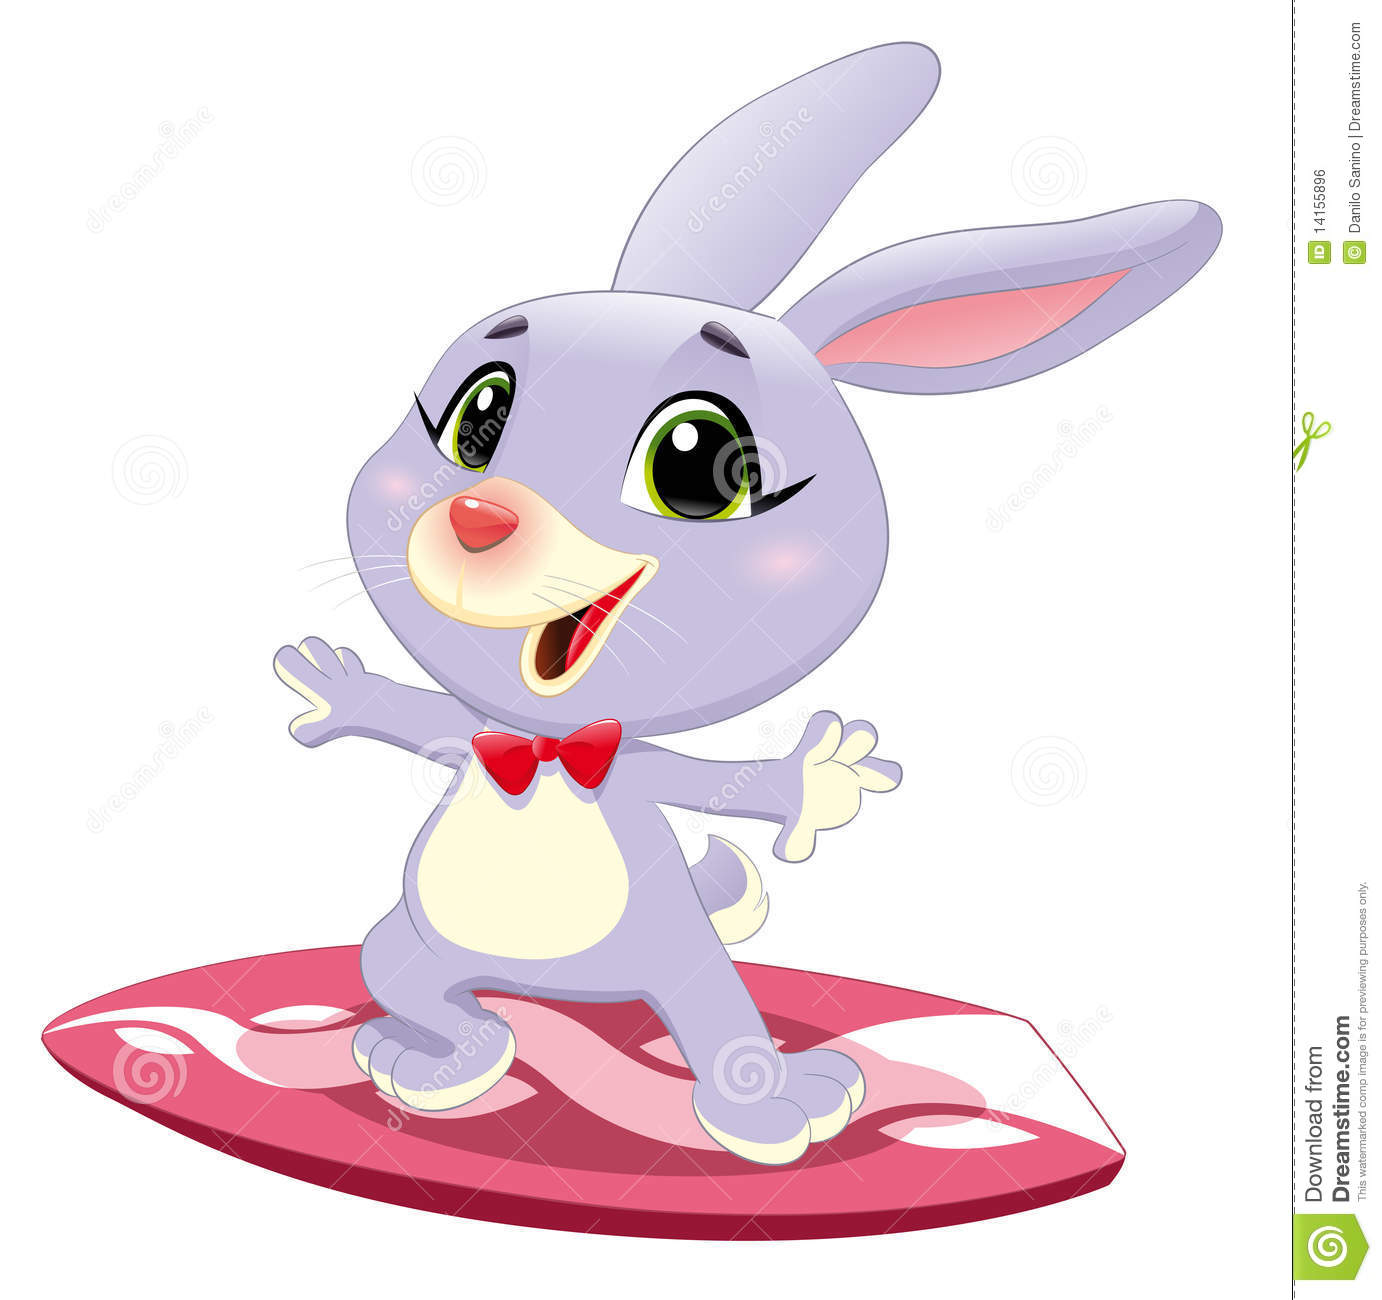 Bunny Rabbit With Surf. Royalty Free Stock Image.